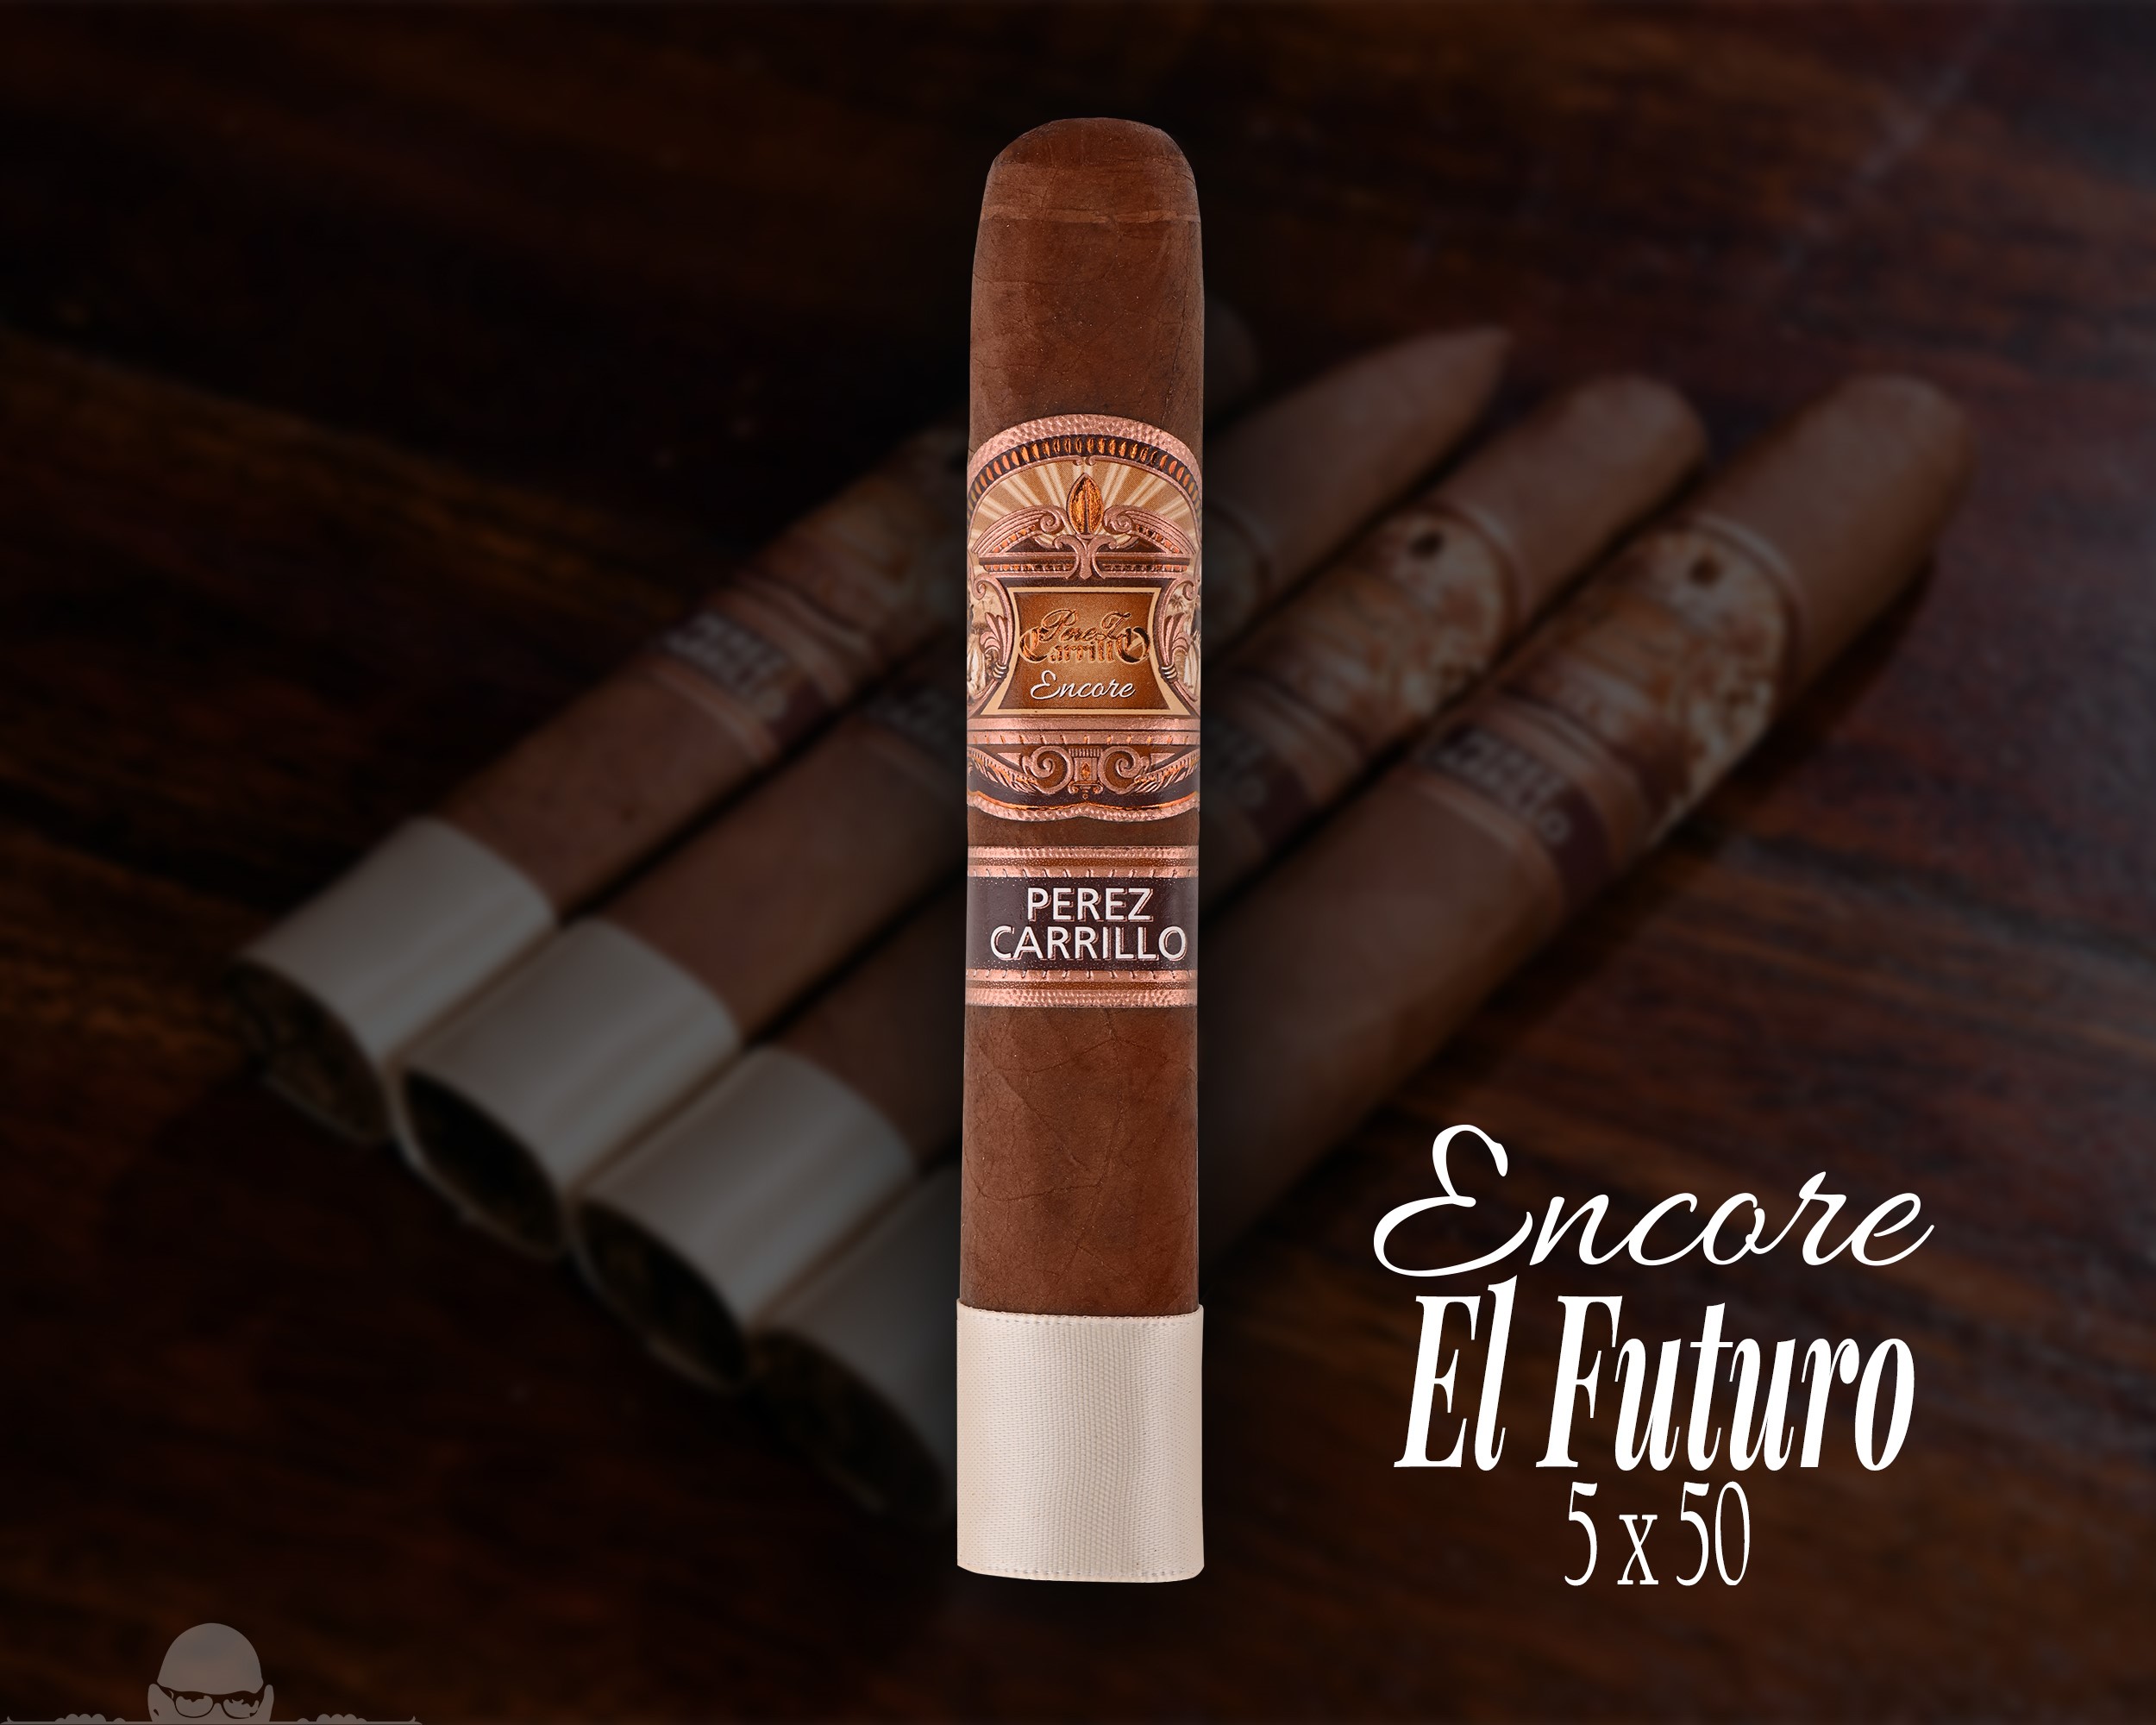 Encore Getting First Robusto